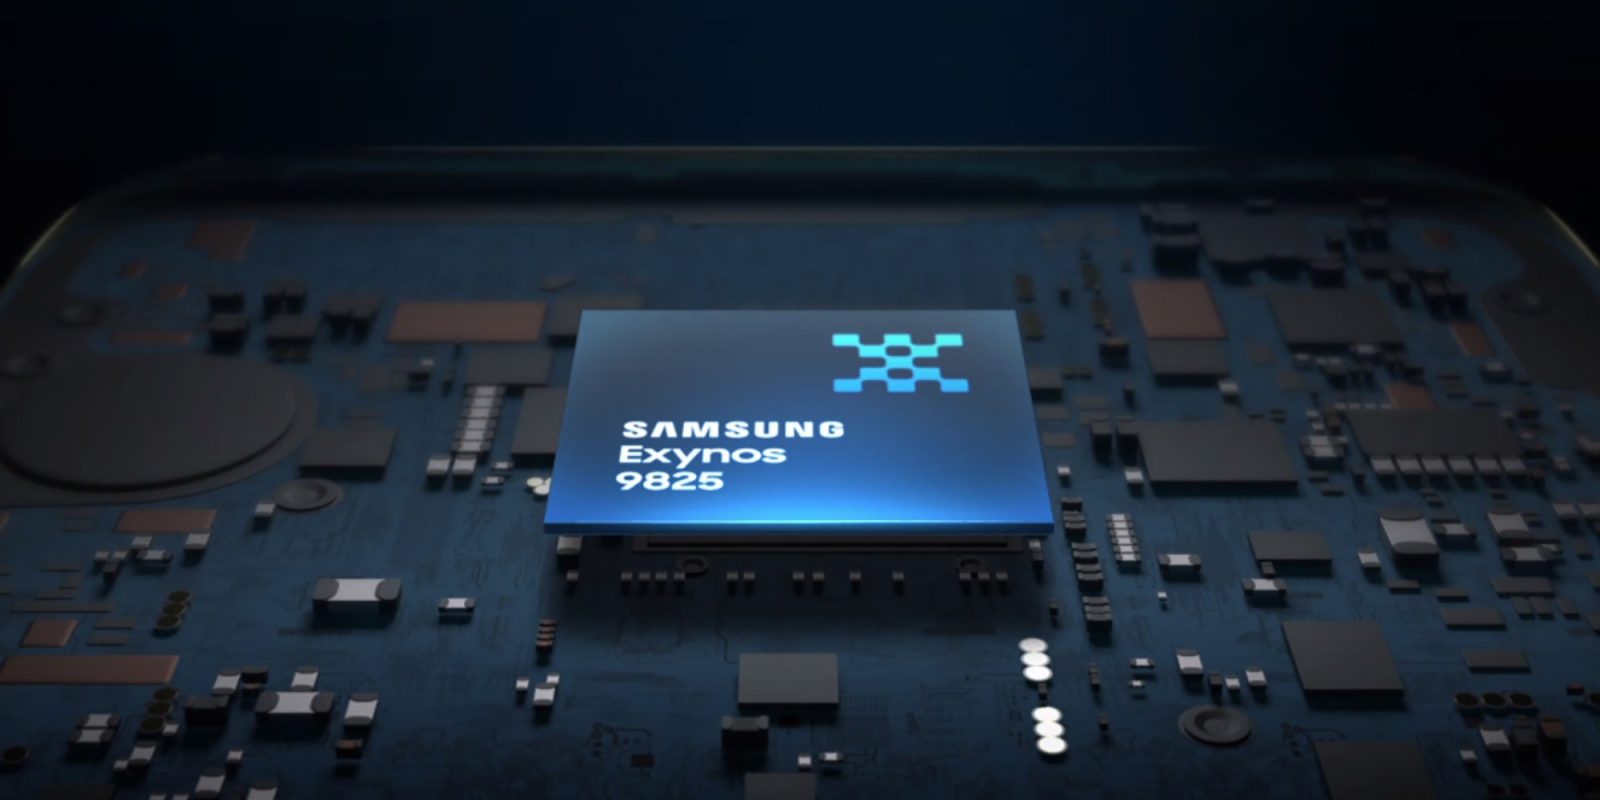 Samsung’s latest chipset in the pipeline is 50% faster than the Galaxy S21’s SoC